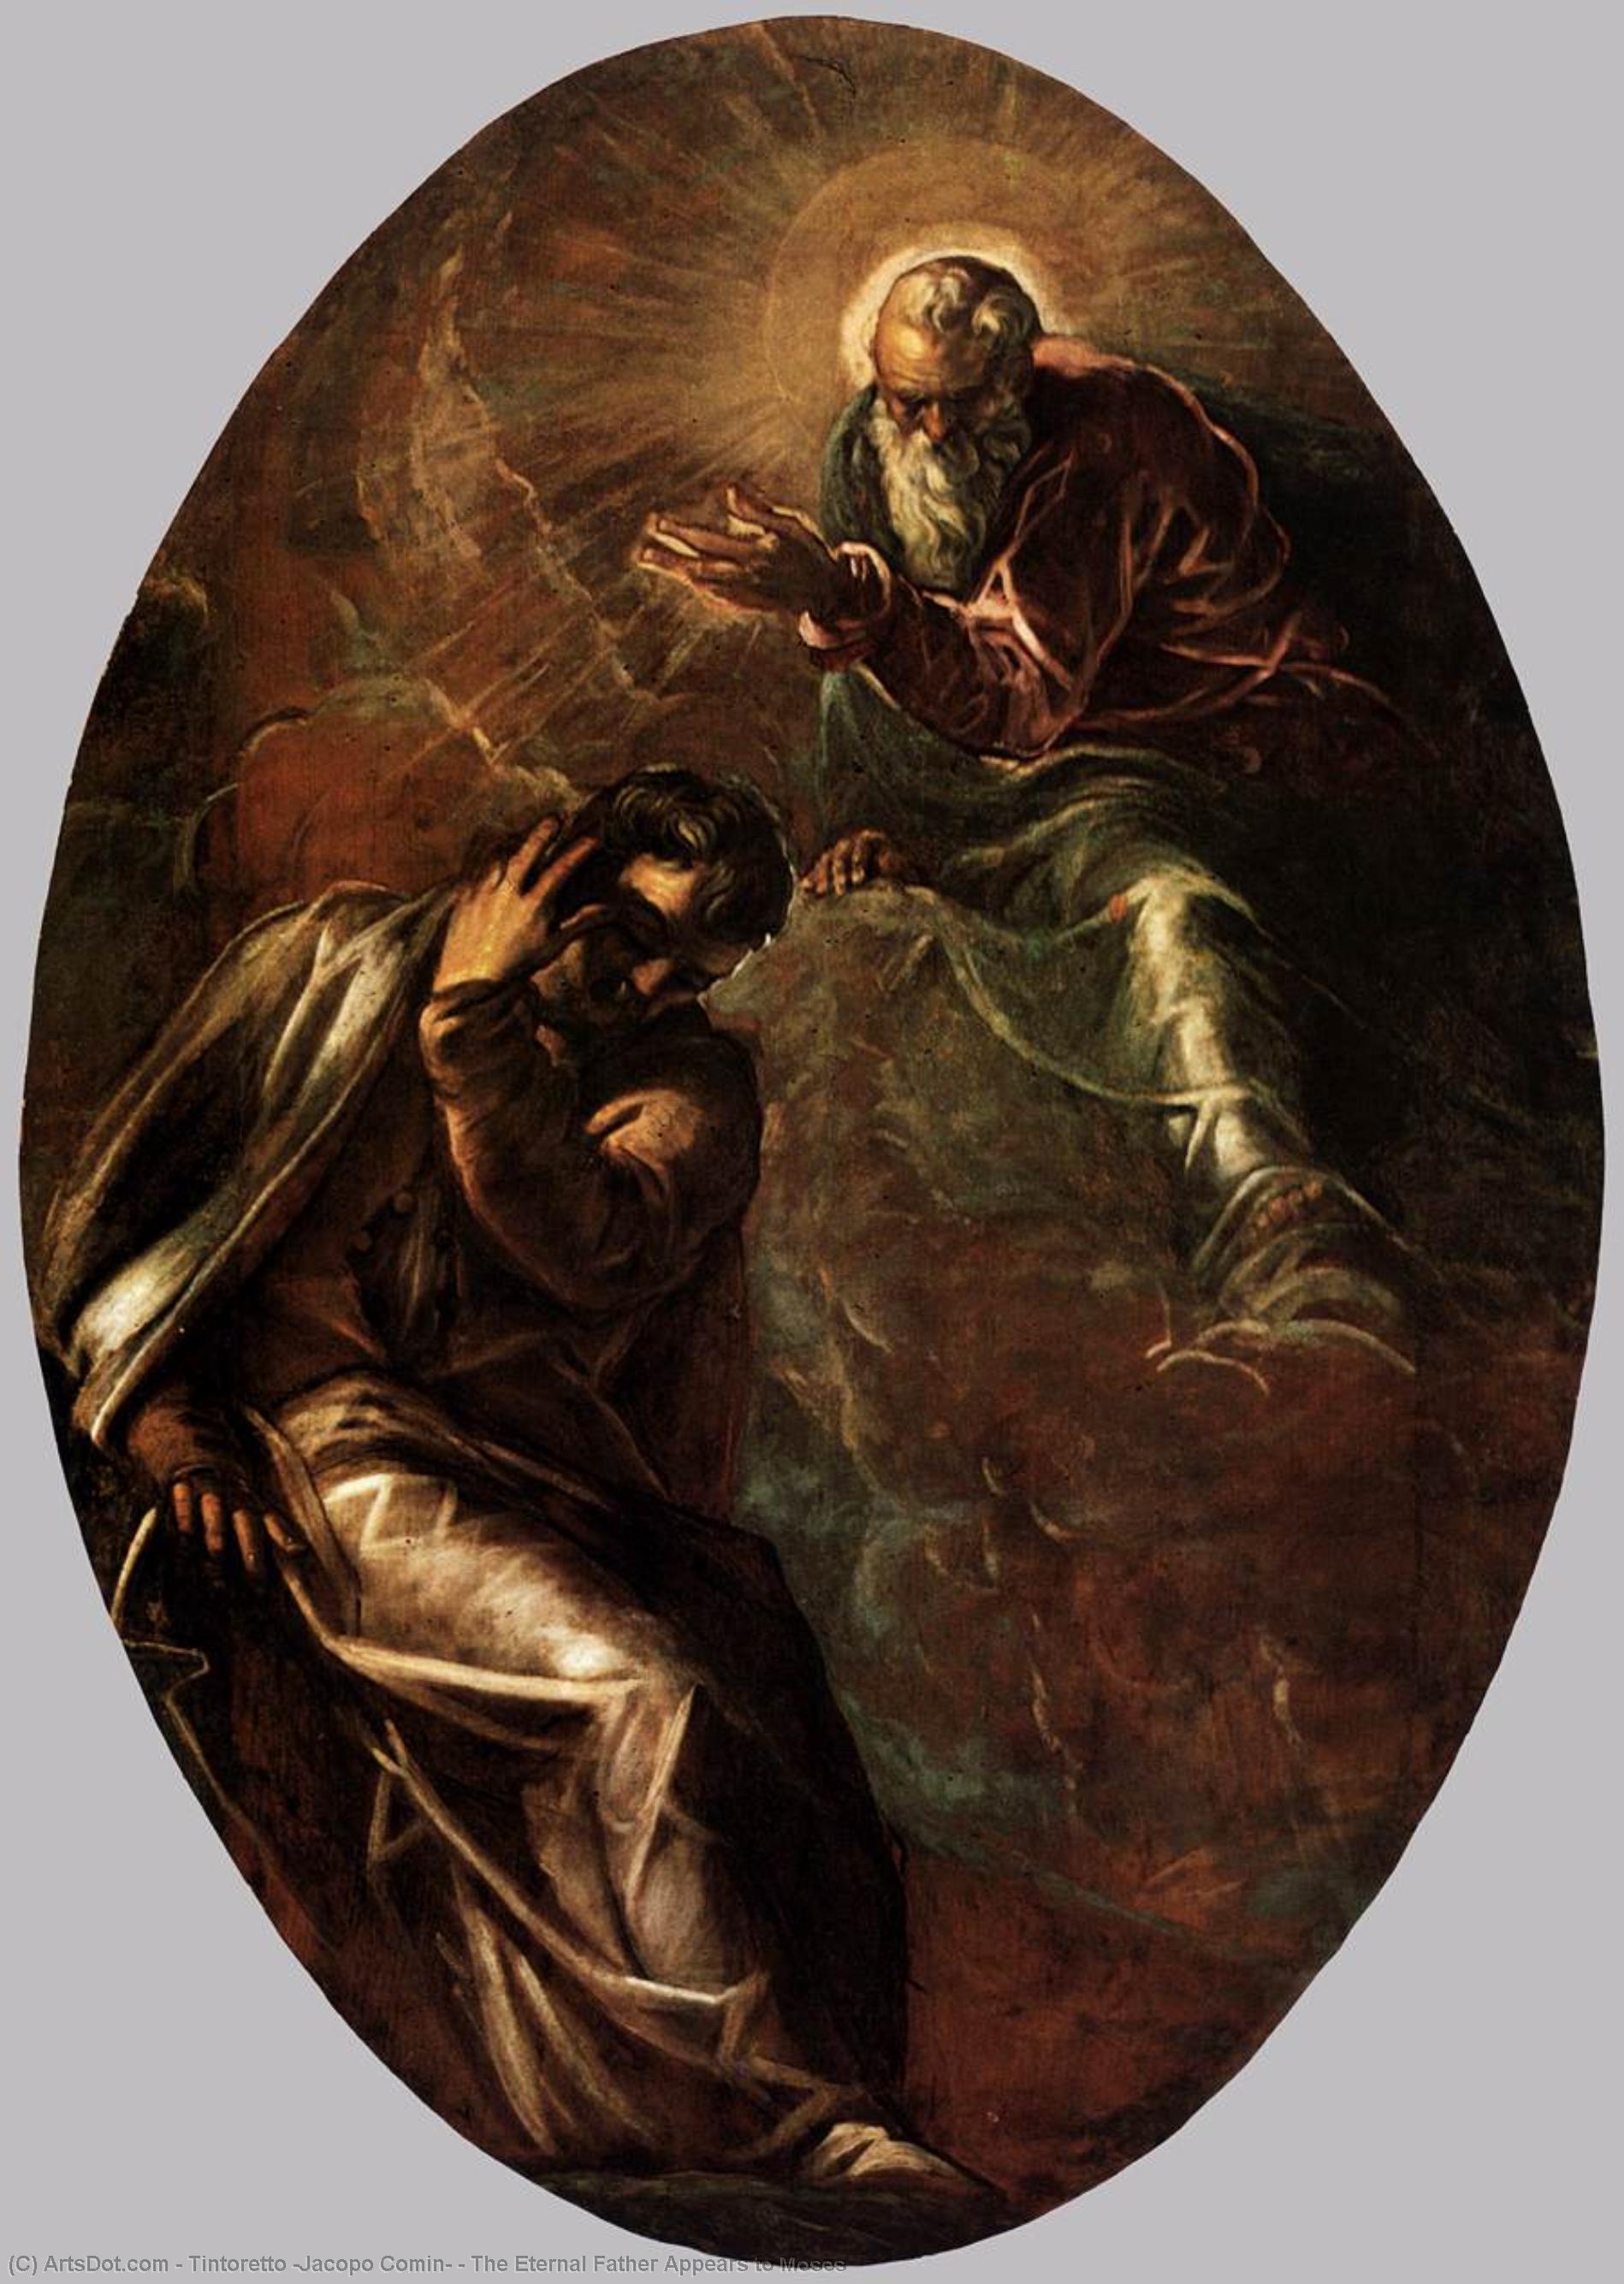 WikiOO.org - Encyclopedia of Fine Arts - Lukisan, Artwork Tintoretto (Jacopo Comin) - The Eternal Father Appears to Moses